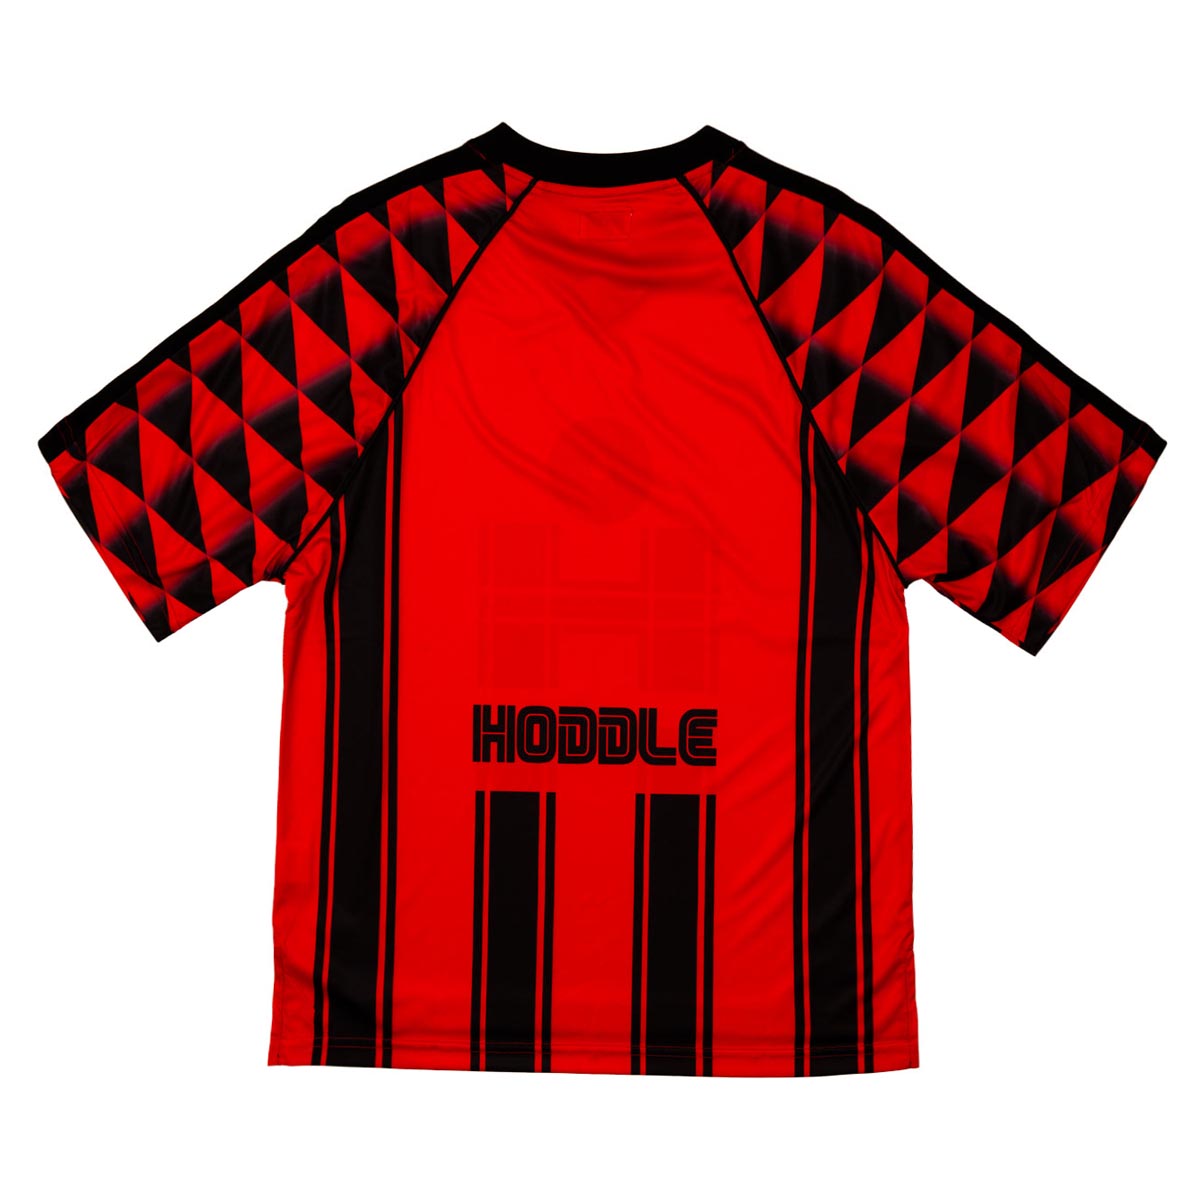 Hoddle Football Jersey - Red/Black image 2